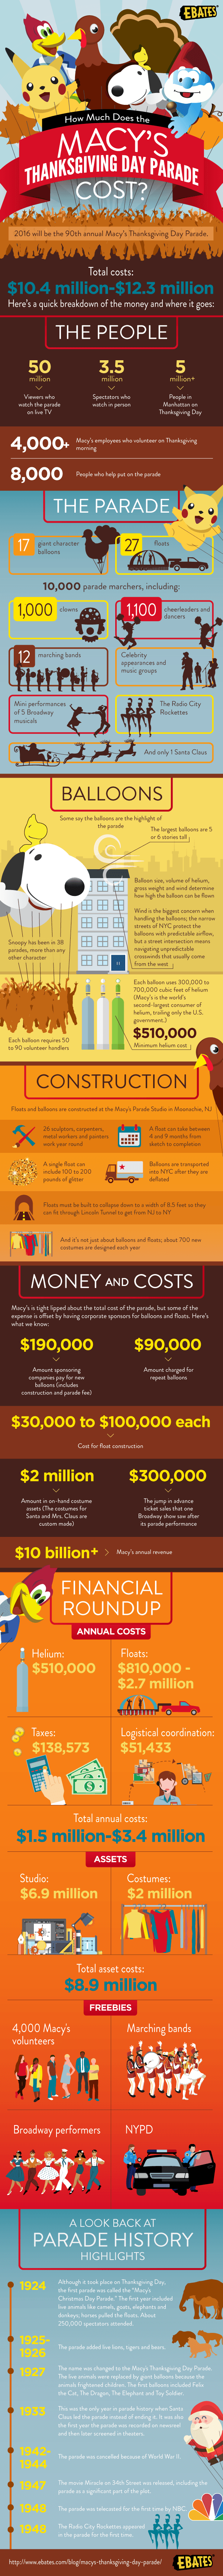 This Is How Much Macy’s Thanksgiving Day Parade Costs - Infographic